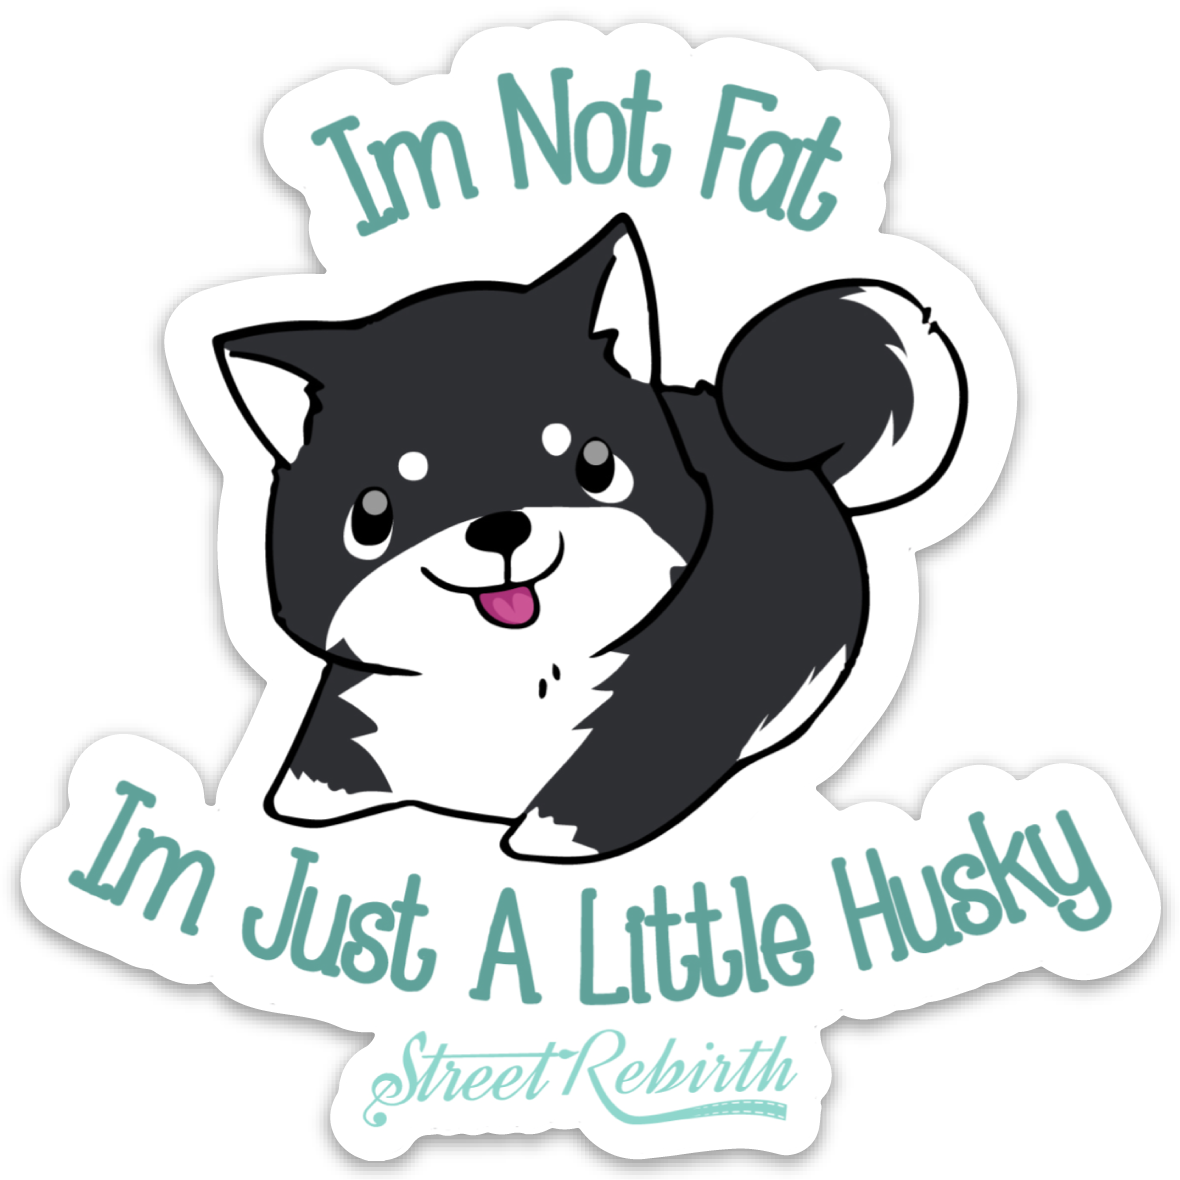 I'm Not Fat Am Just Alittle Husky PUN STICKER – ONE 4 INCH WATER PROOF VINYL STICKER – FOR HYDRO FLASK, SKATEBOARD, LAPTOP, PLANNER, CAR, COLLECTING, GIFTING